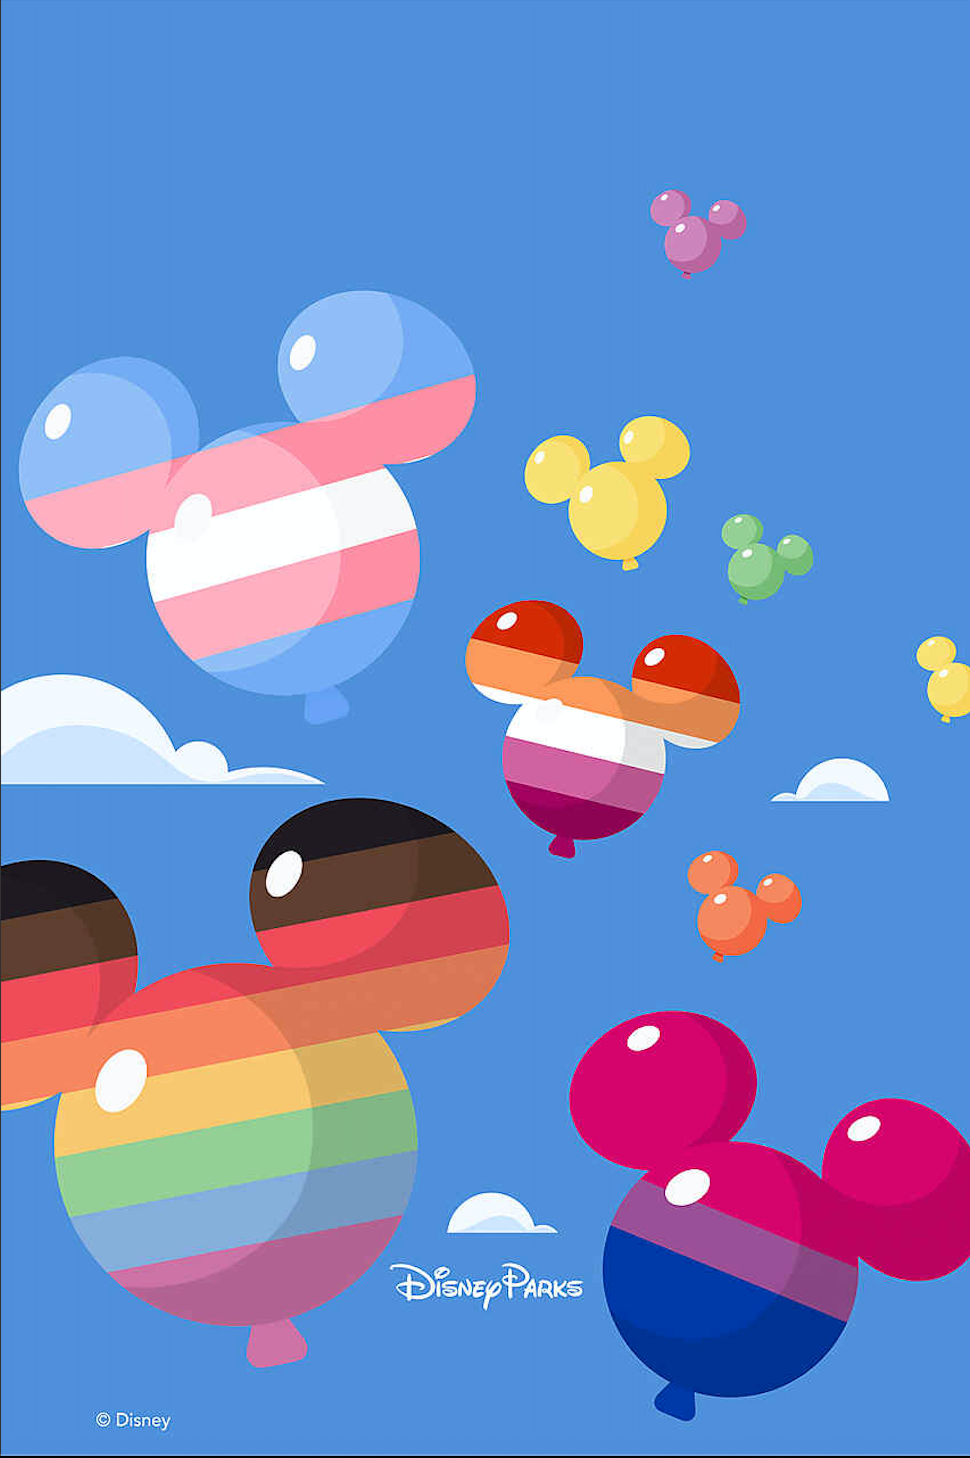  Disney Pride Wallpapers for Your Phone the disney food blog